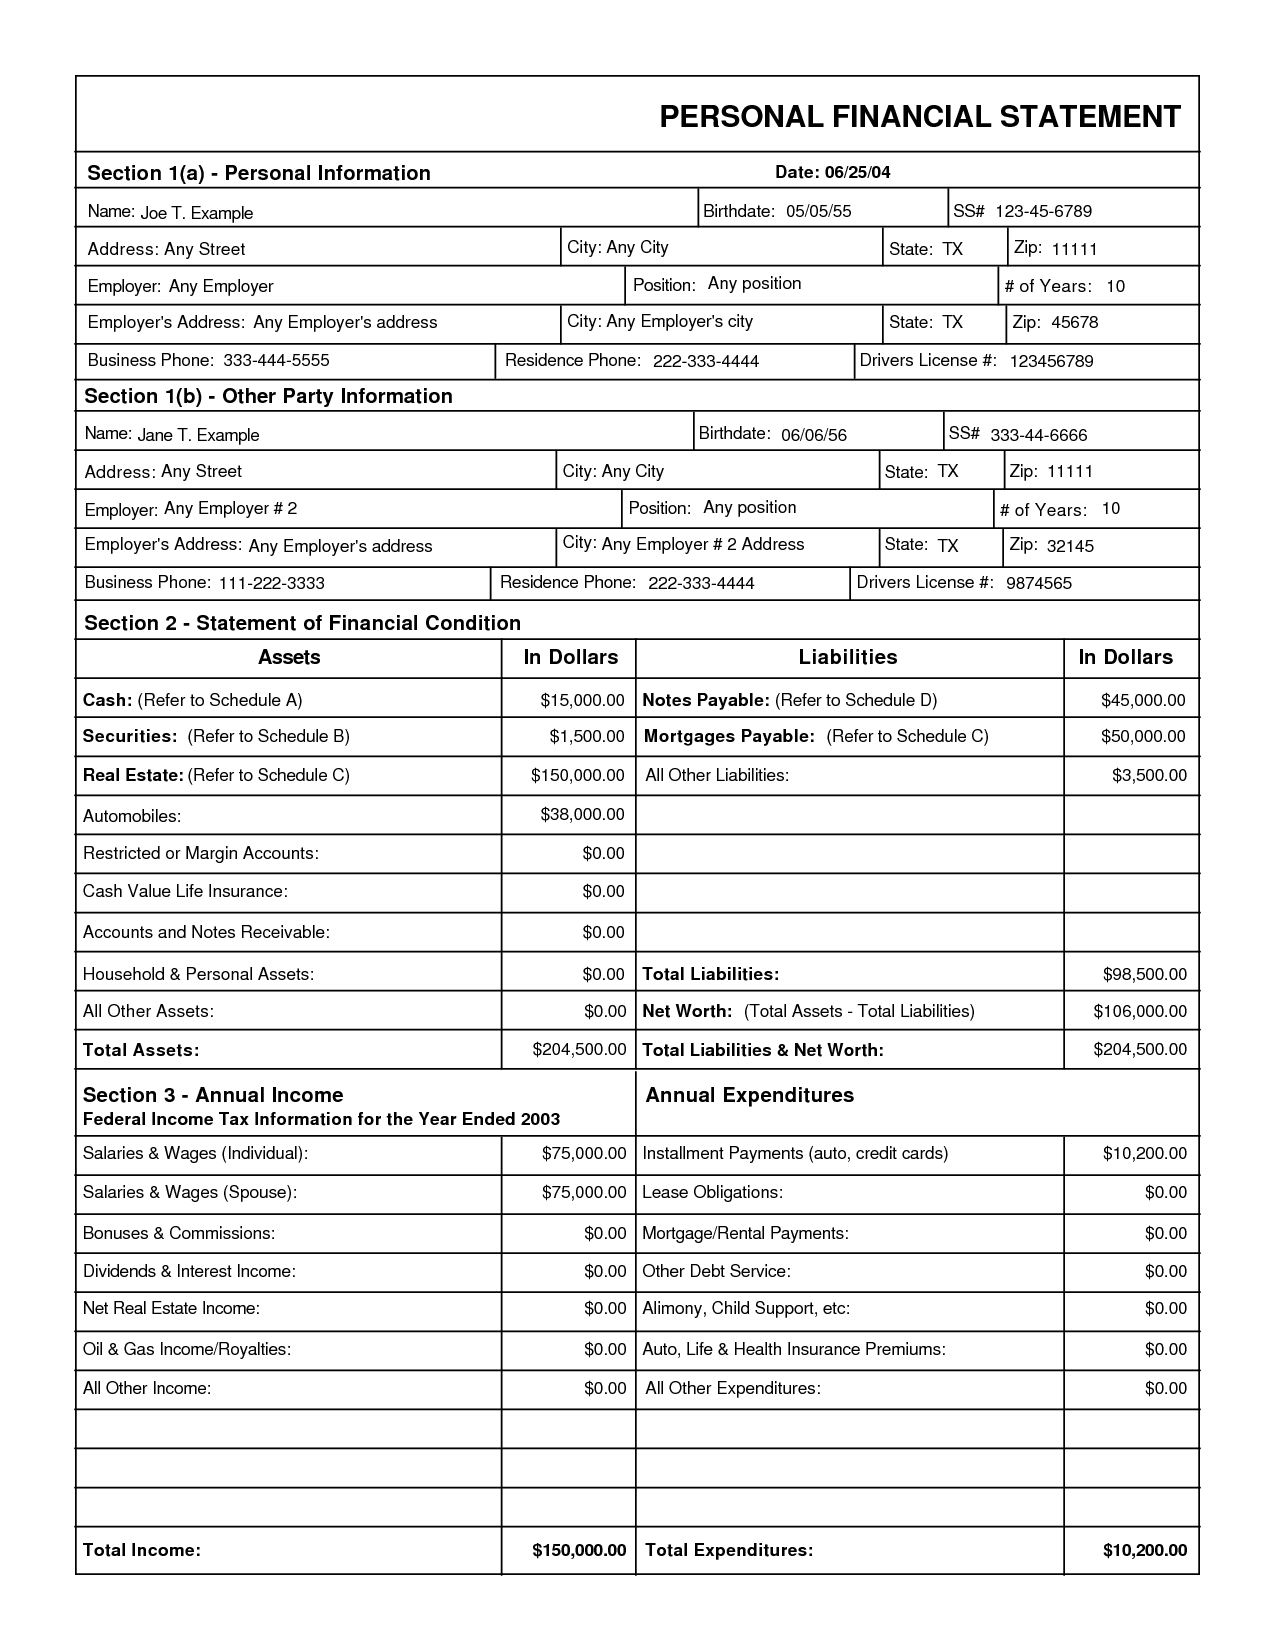 40+ Personal Financial Statement Templates & Forms   Template Lab